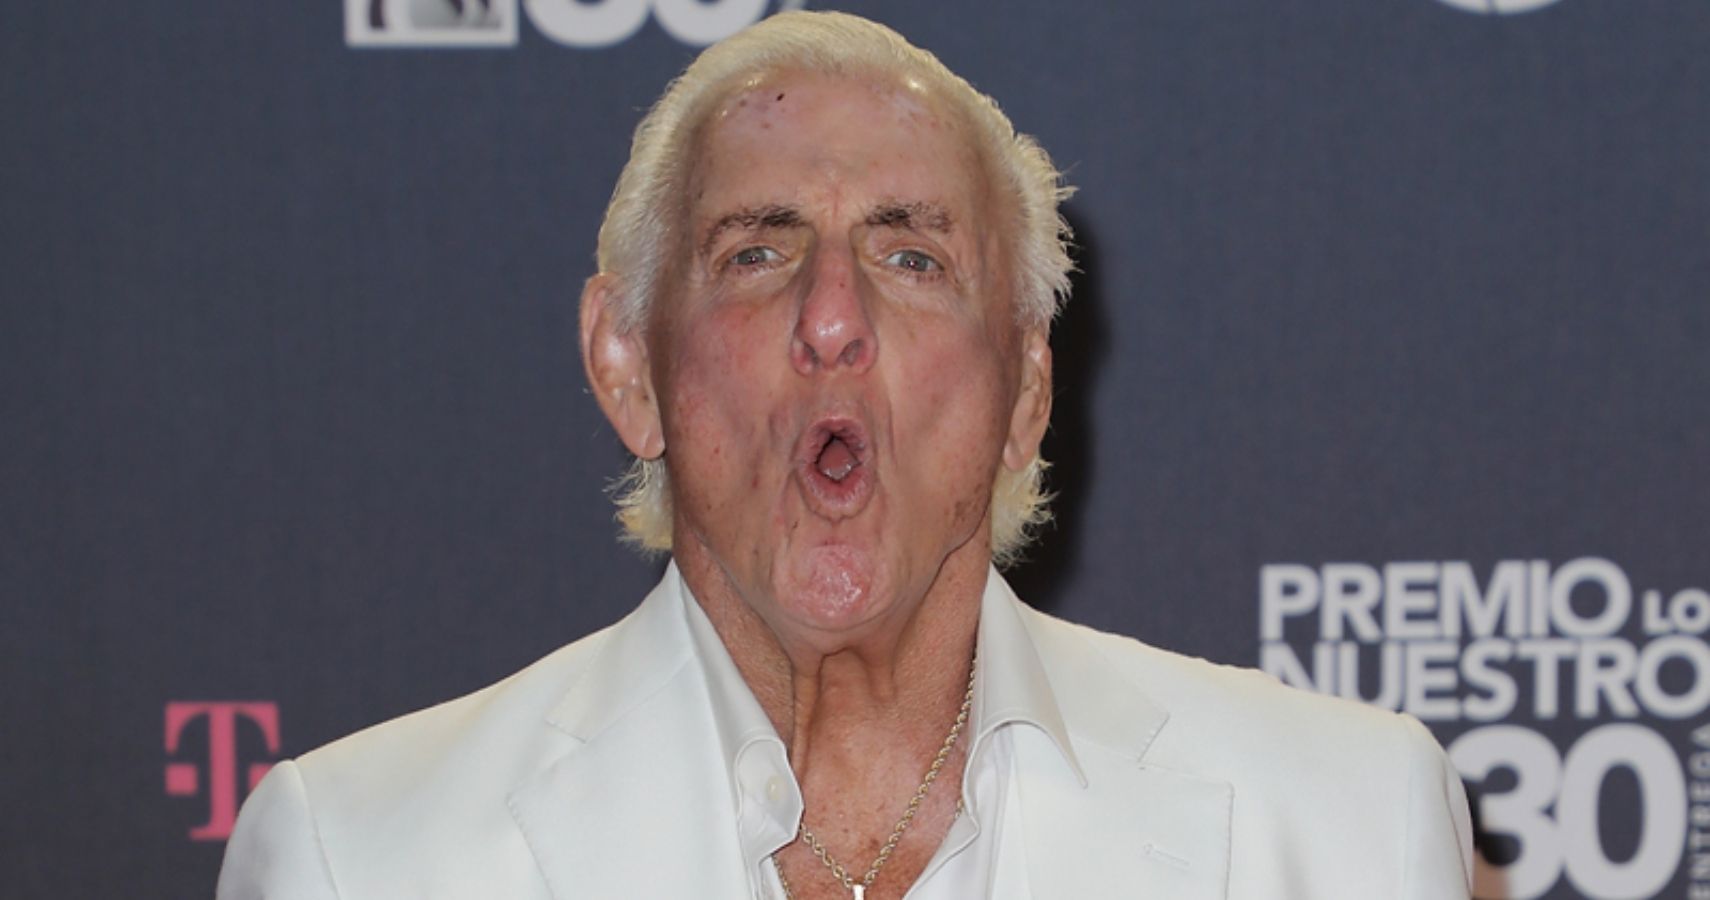 How is Ric Flair not a millionaire?